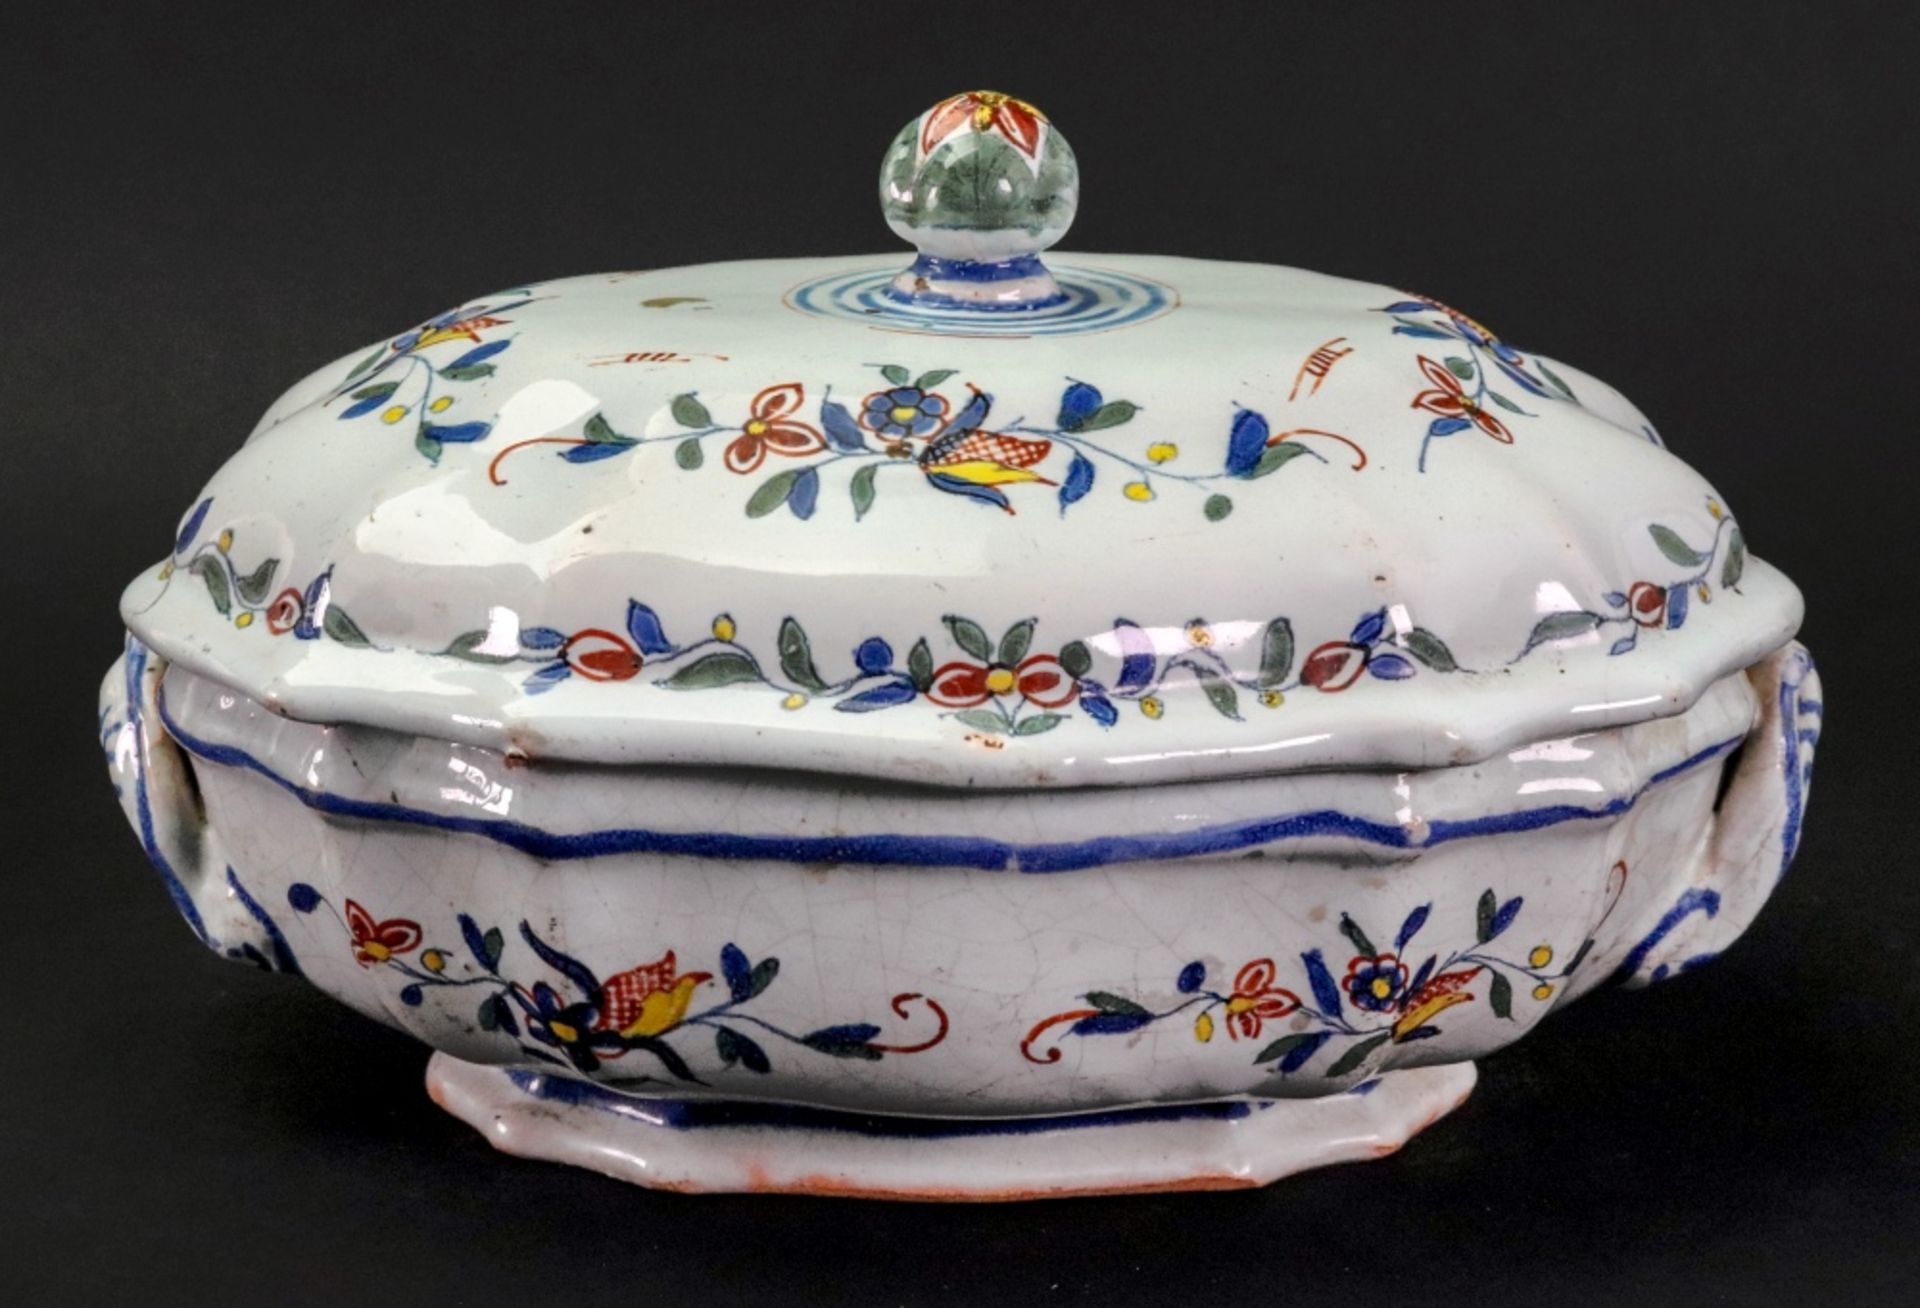 A French Faience polychrome two-handled tureen and cover, 18th century,